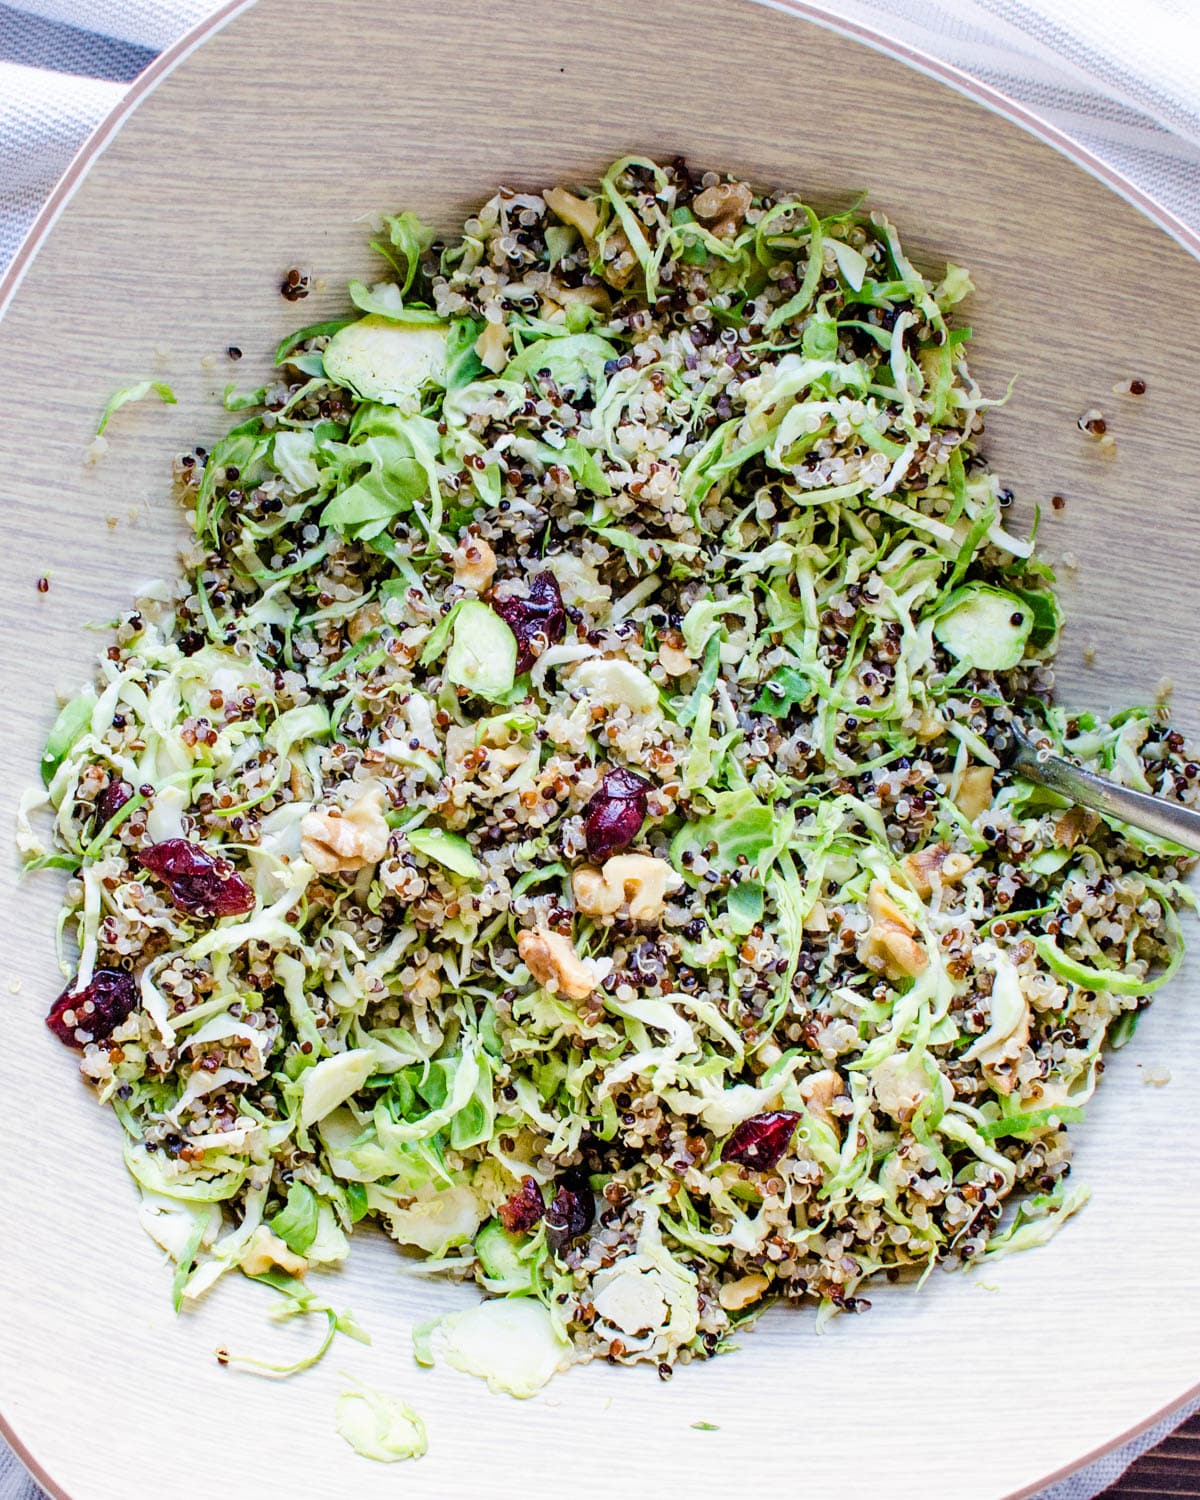 Toss the quinoa and brussels sprouts salad with dried cranberries. 